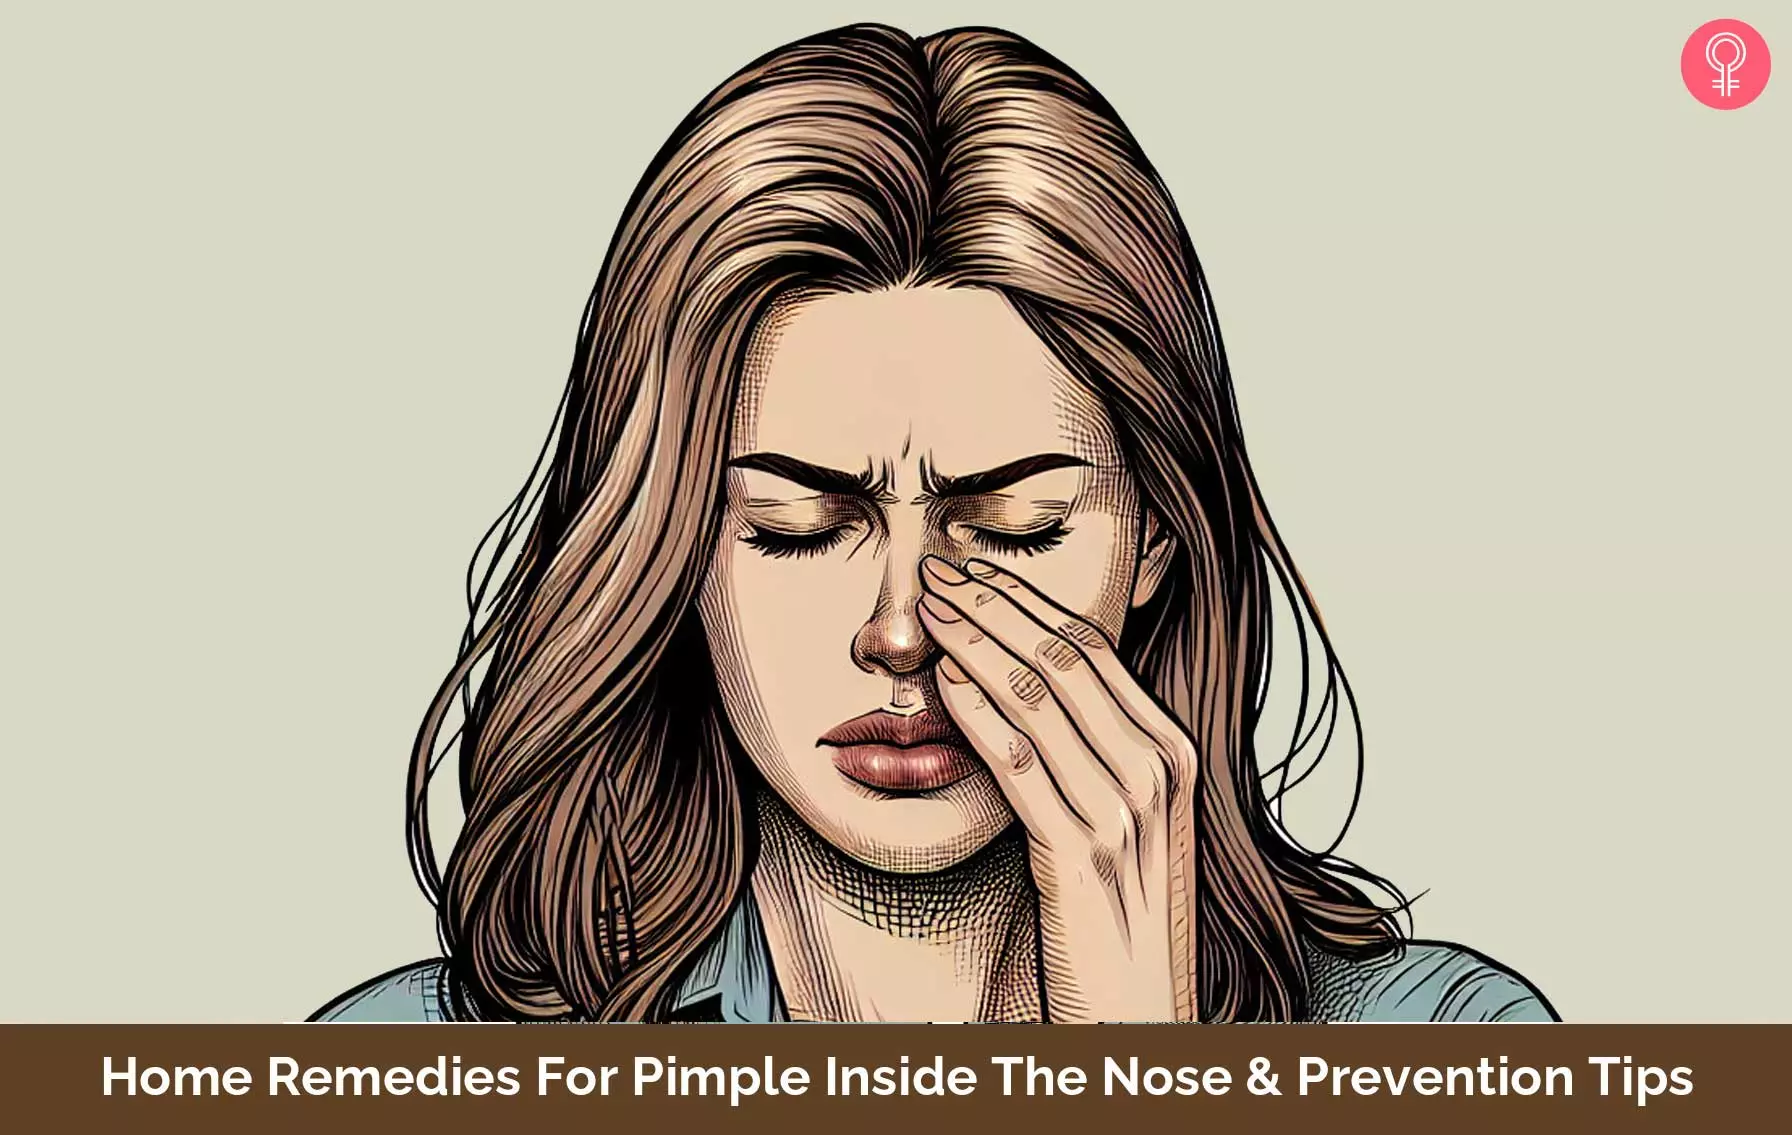 7 Home Remedies For Pimple Inside The Nose & Prevention Tips